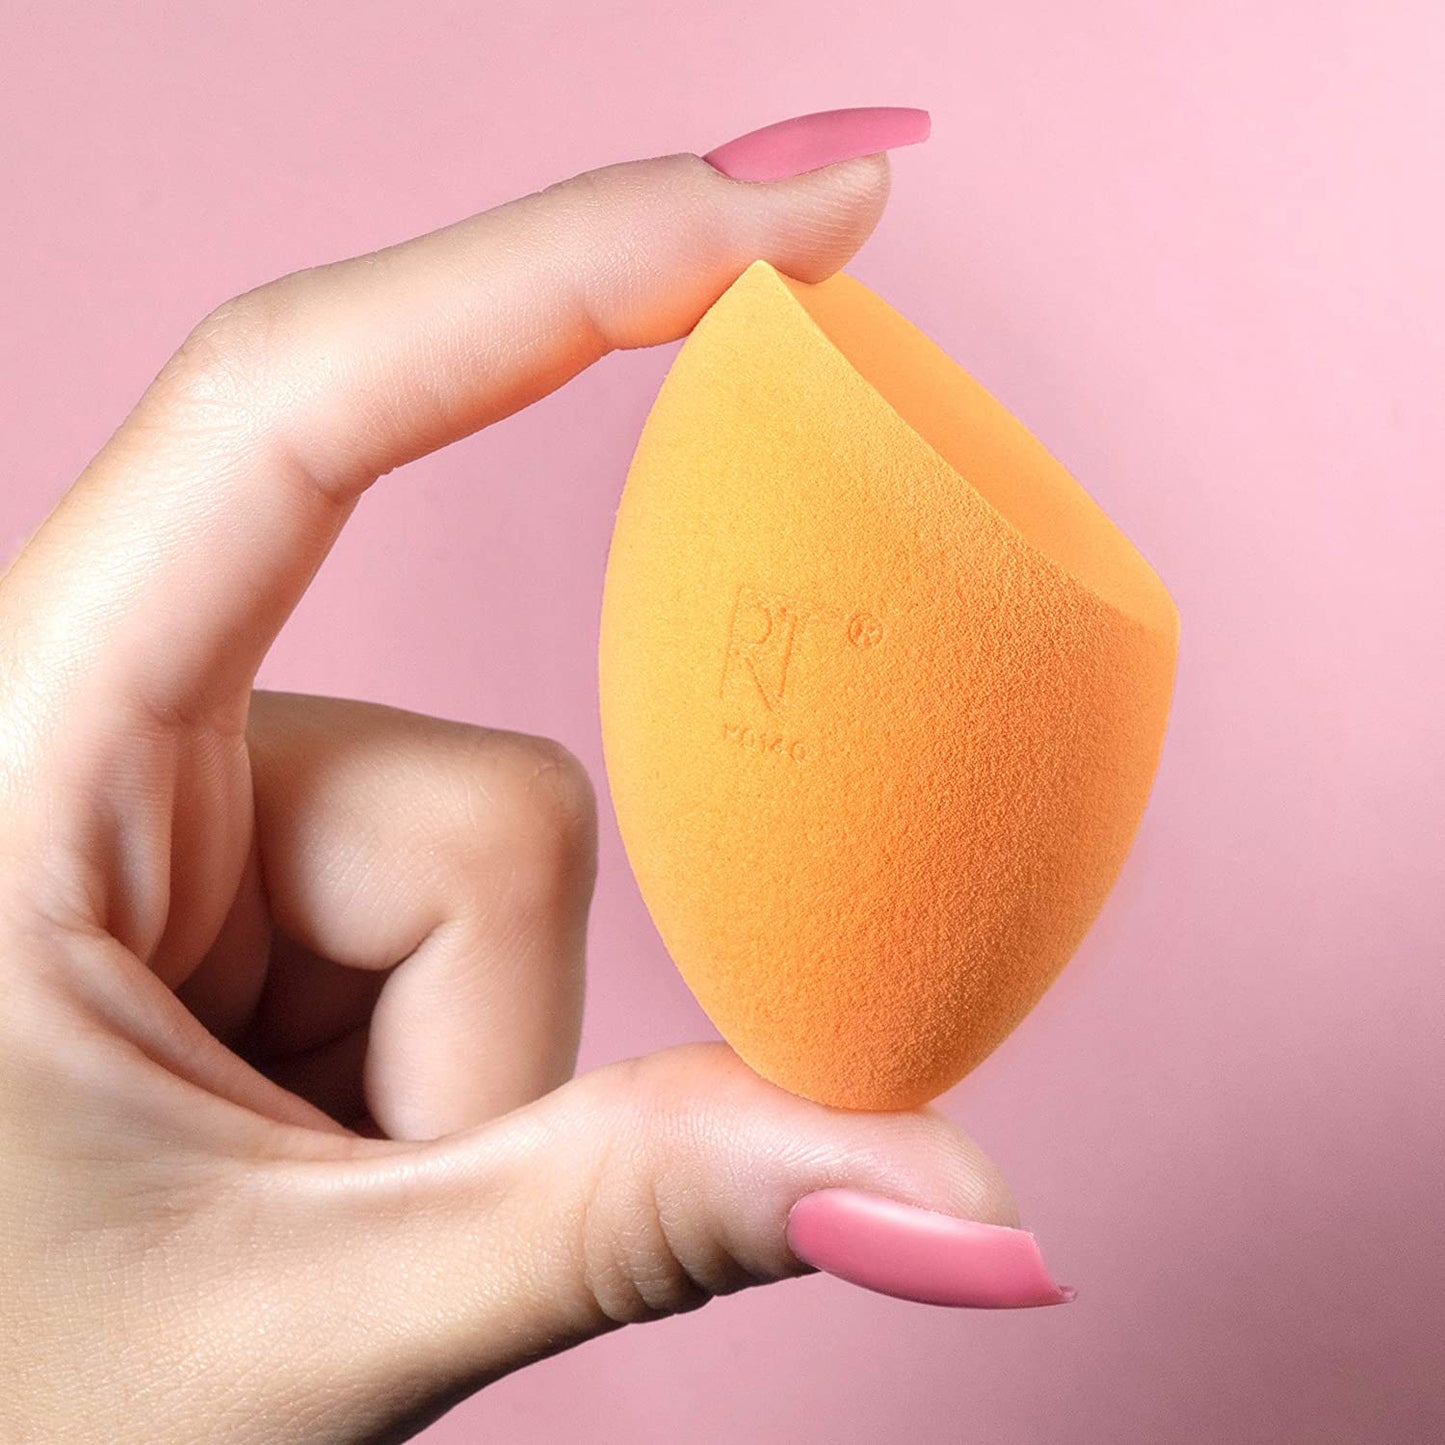 REAL TECHNIQUES 4 MIRACLE COMPLEXION MAKE UP SPONGES